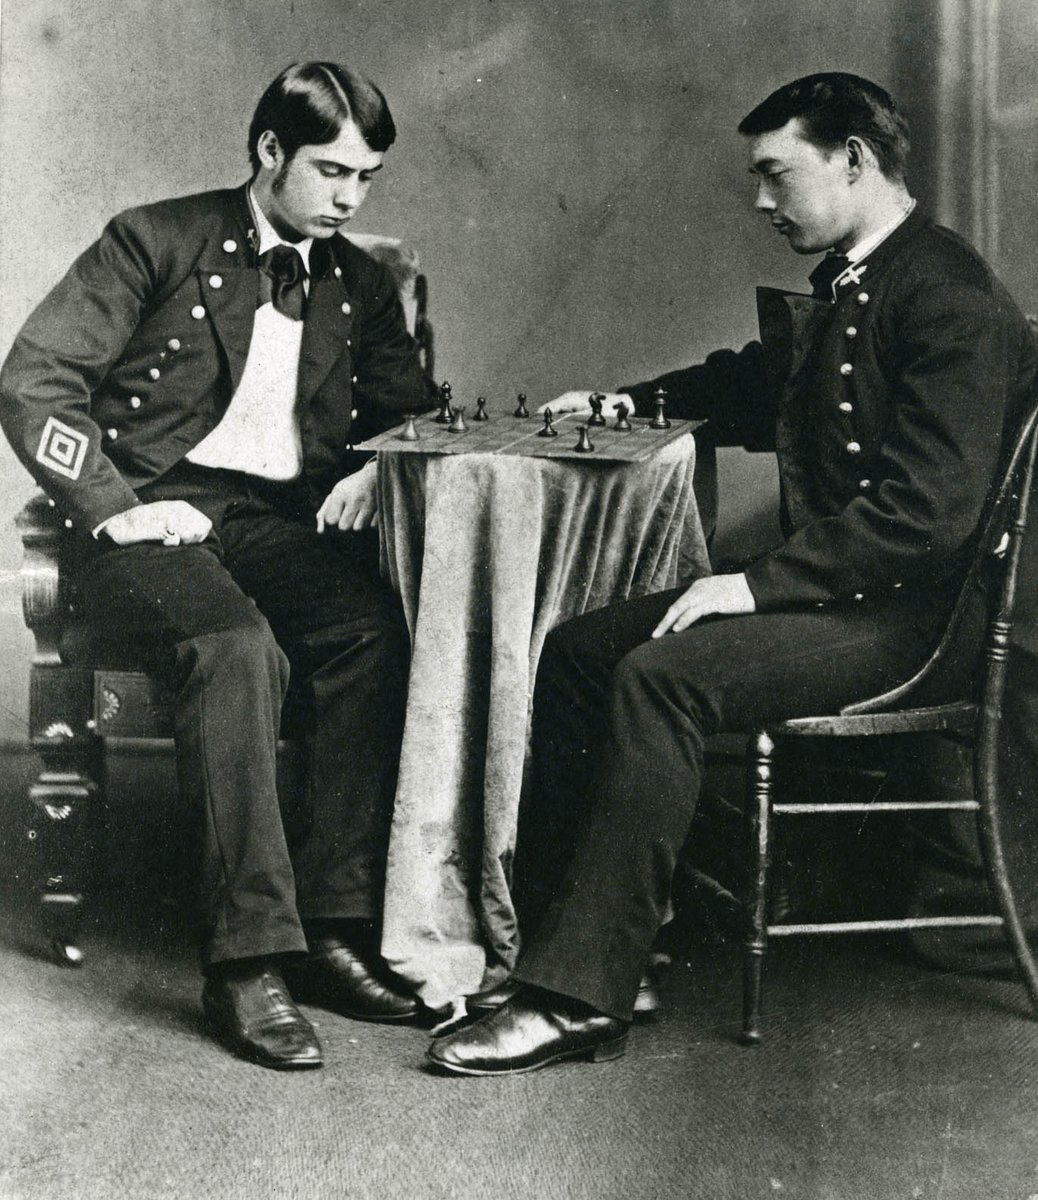 A busy schedule means there aren't many #archivesgames photos of @NavalAcademy  midshipmen to choose from, but even they can find time to play #chess. #ArchivesHashtagParty 
usna.primo.exlibrisgroup.com/permalink/01US…